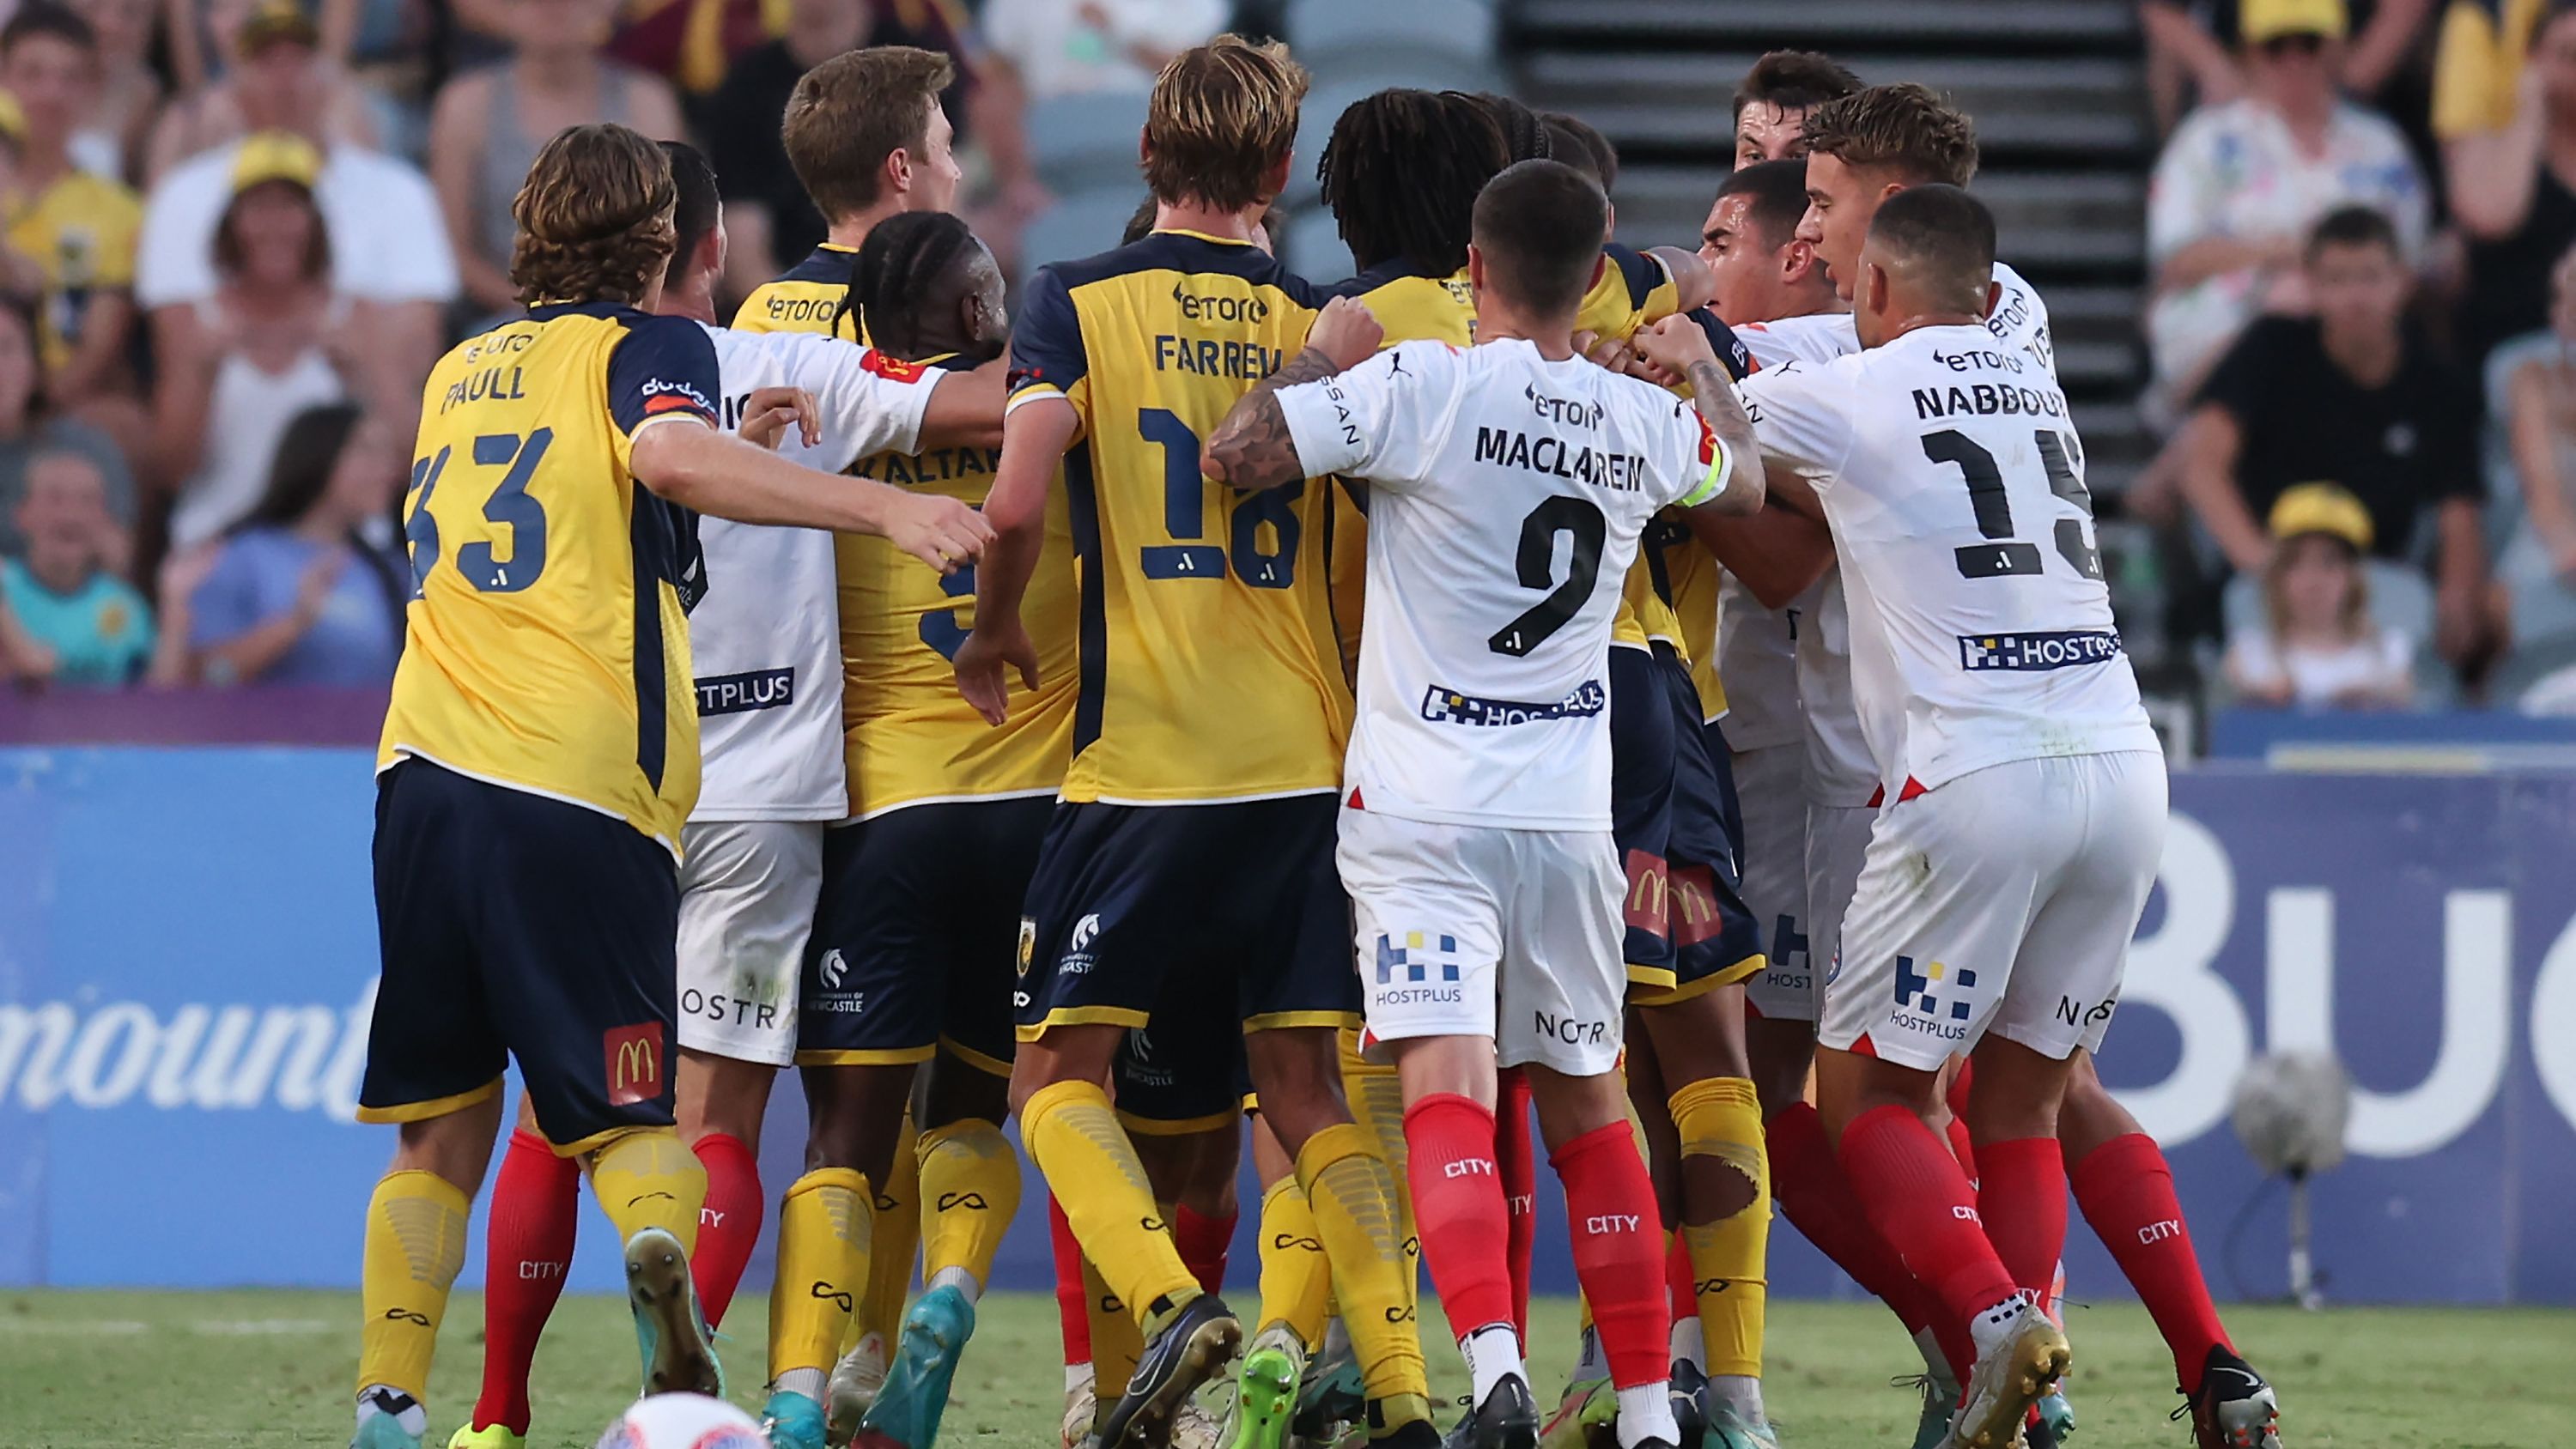 'No love lost': Tensions spill in wild A-League stoppage time melee